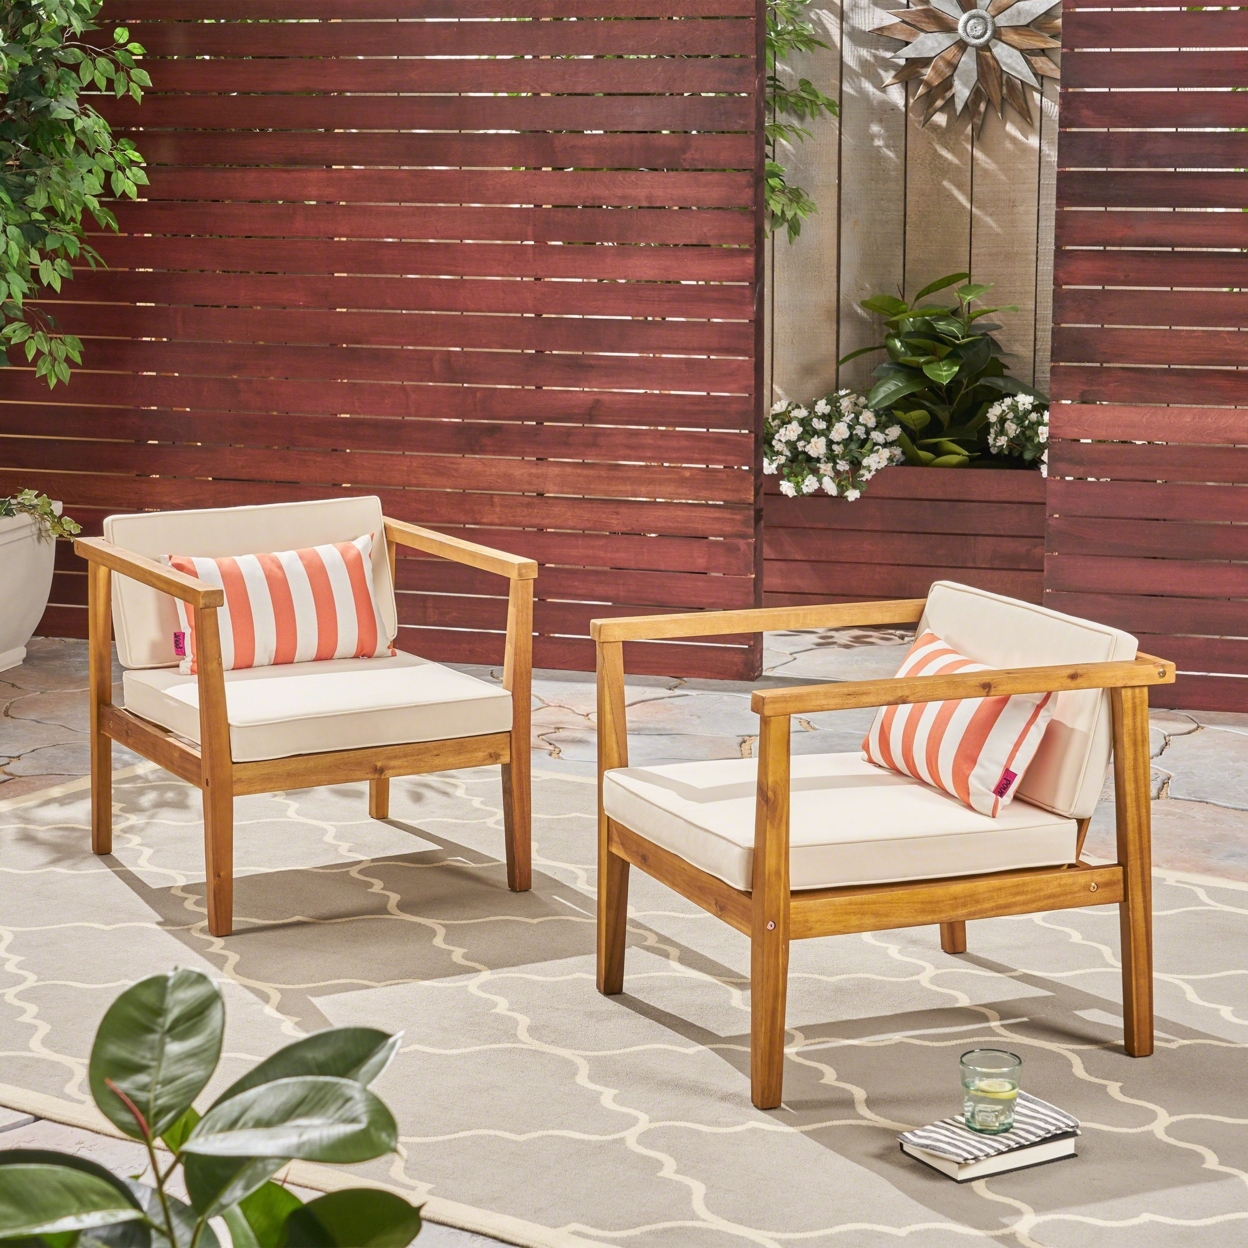 Thomson Outdoor Acacia Wood Club Chairs With Water-Resistant Cushions (Set Of 2) - Teak / Beige